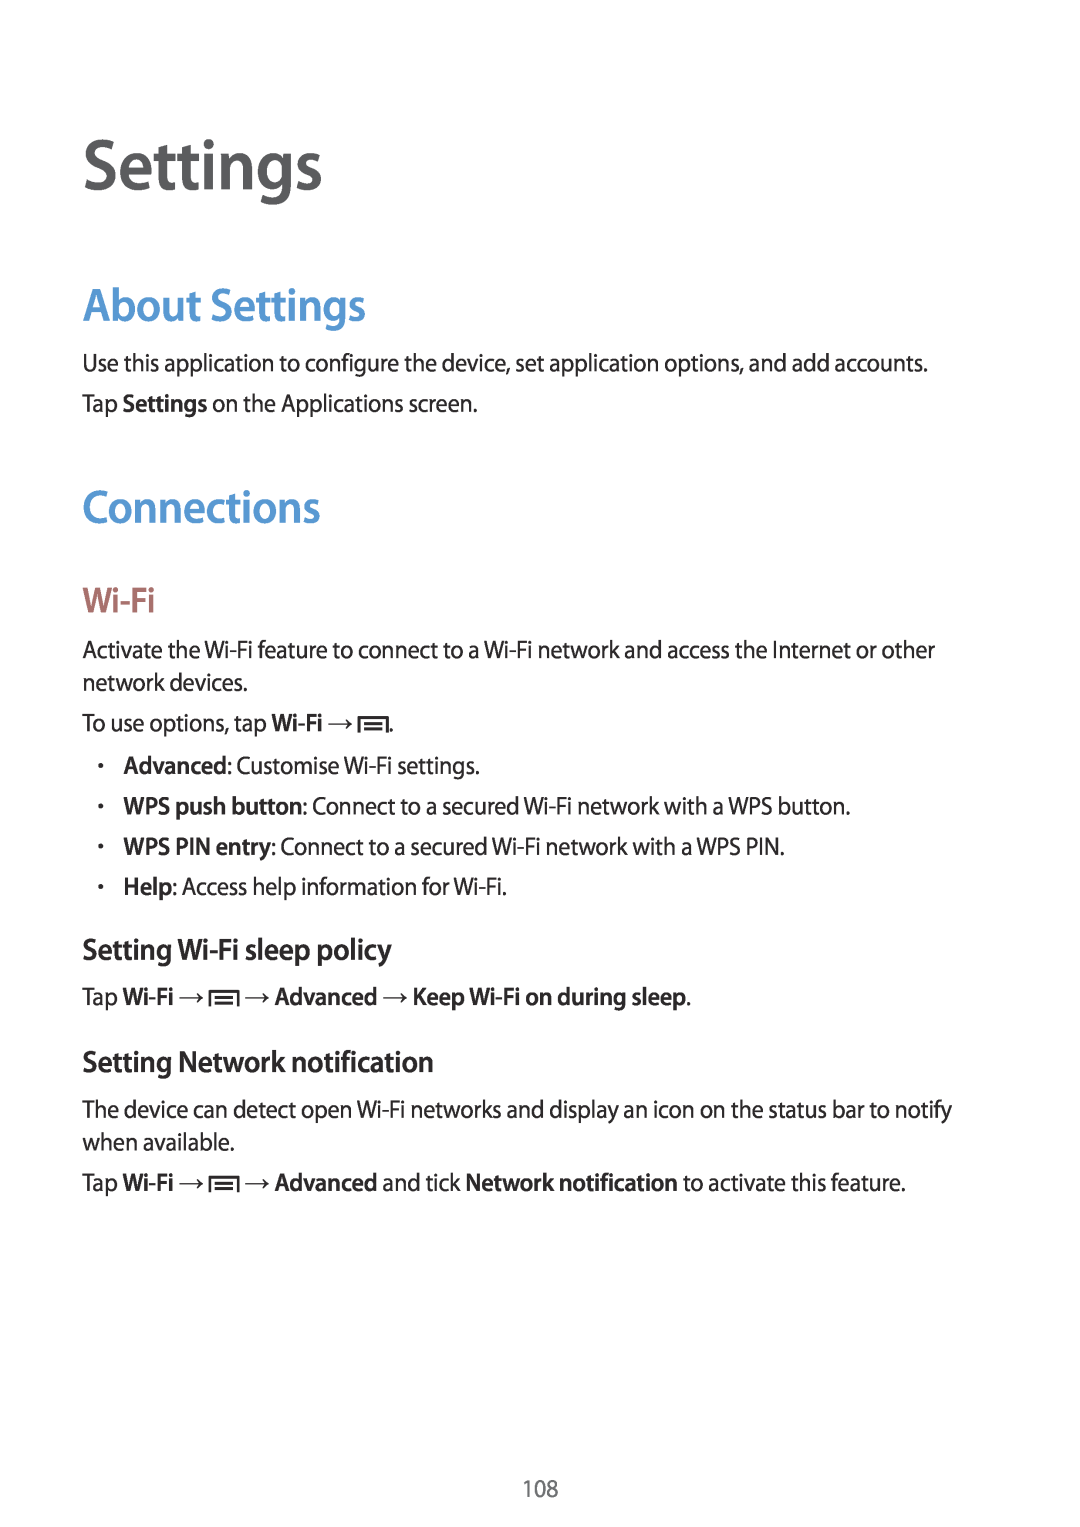 Samsung SM-P6000ZKAXEZ manual About Settings, Connections, Setting Wi-Fi sleep policy, Setting Network notification 